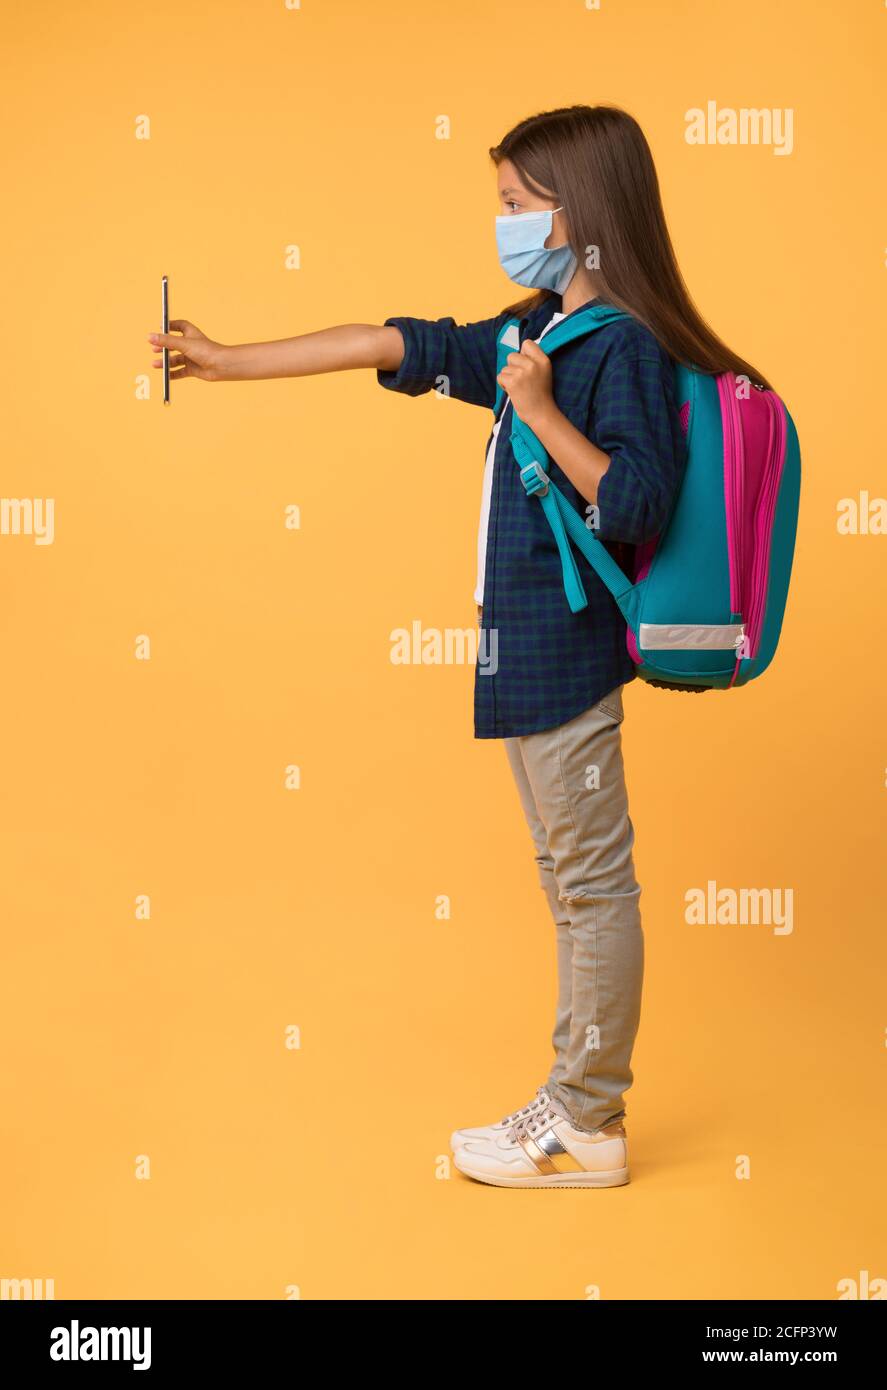 Schoolgirl showing cell phone with outstretched hand Stock Photo